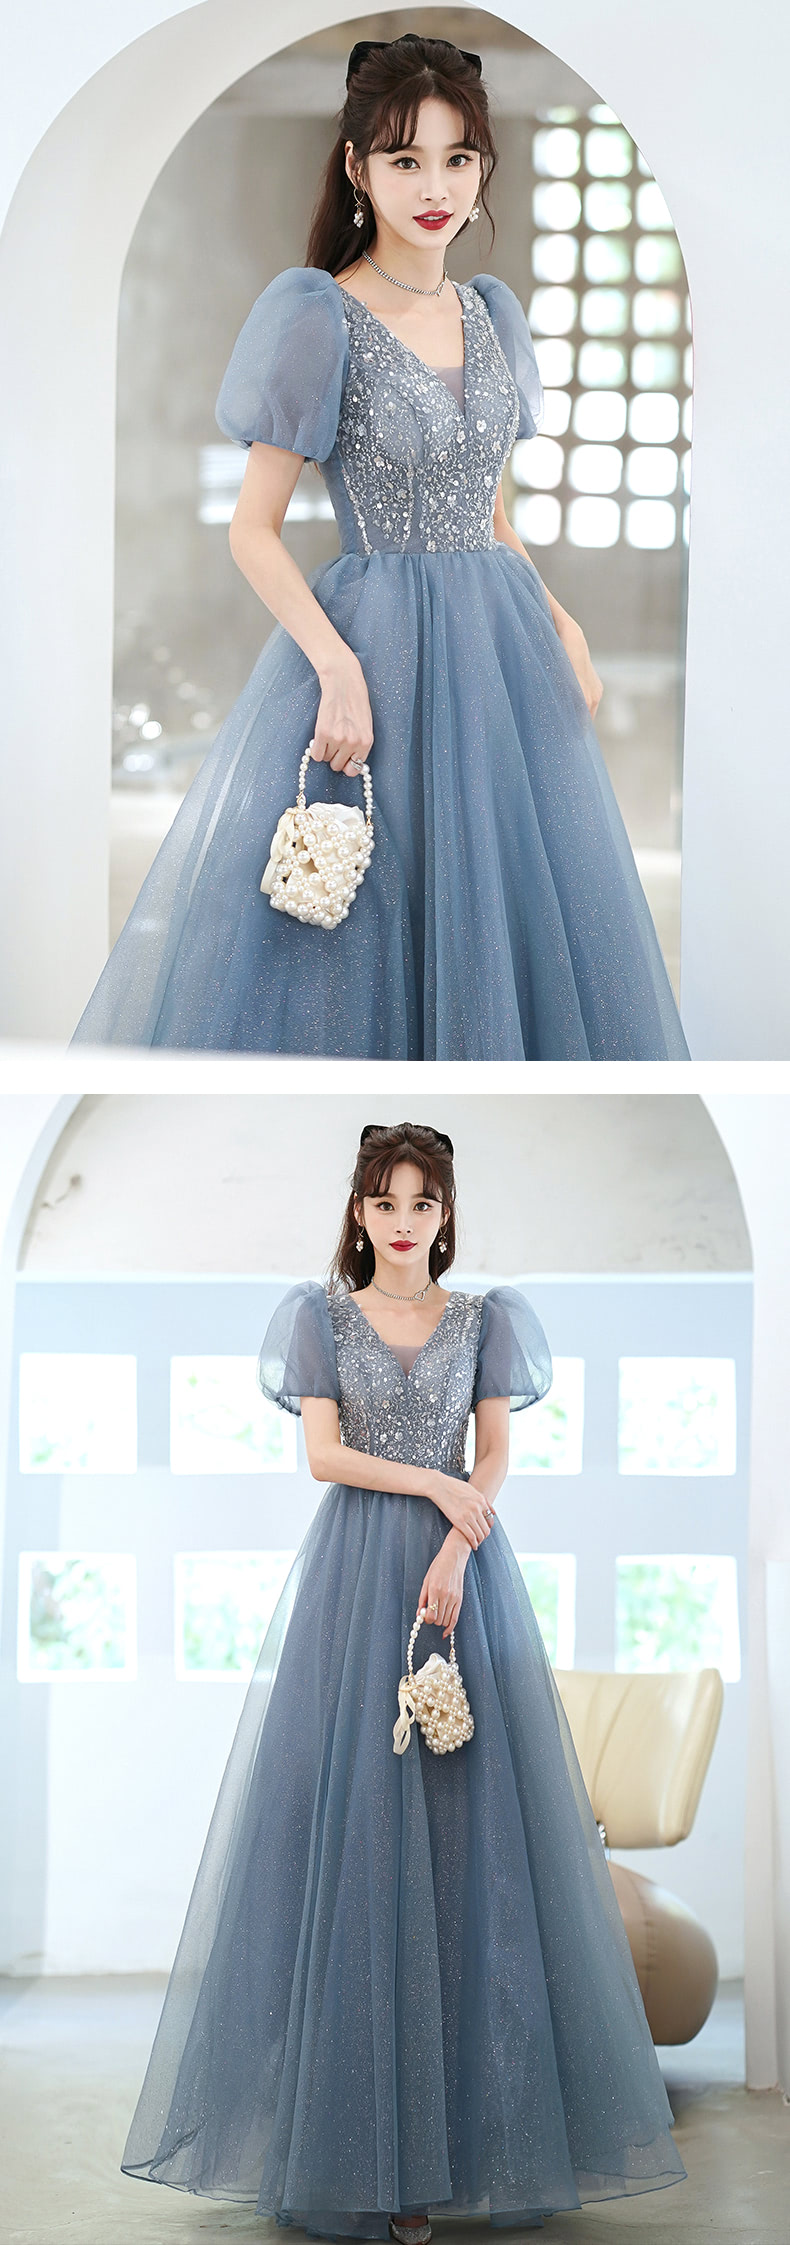 A-Line-Blue-Tulle-Short-Sleeve-Prom-Party-Formal-Evening-Dress15.jpg